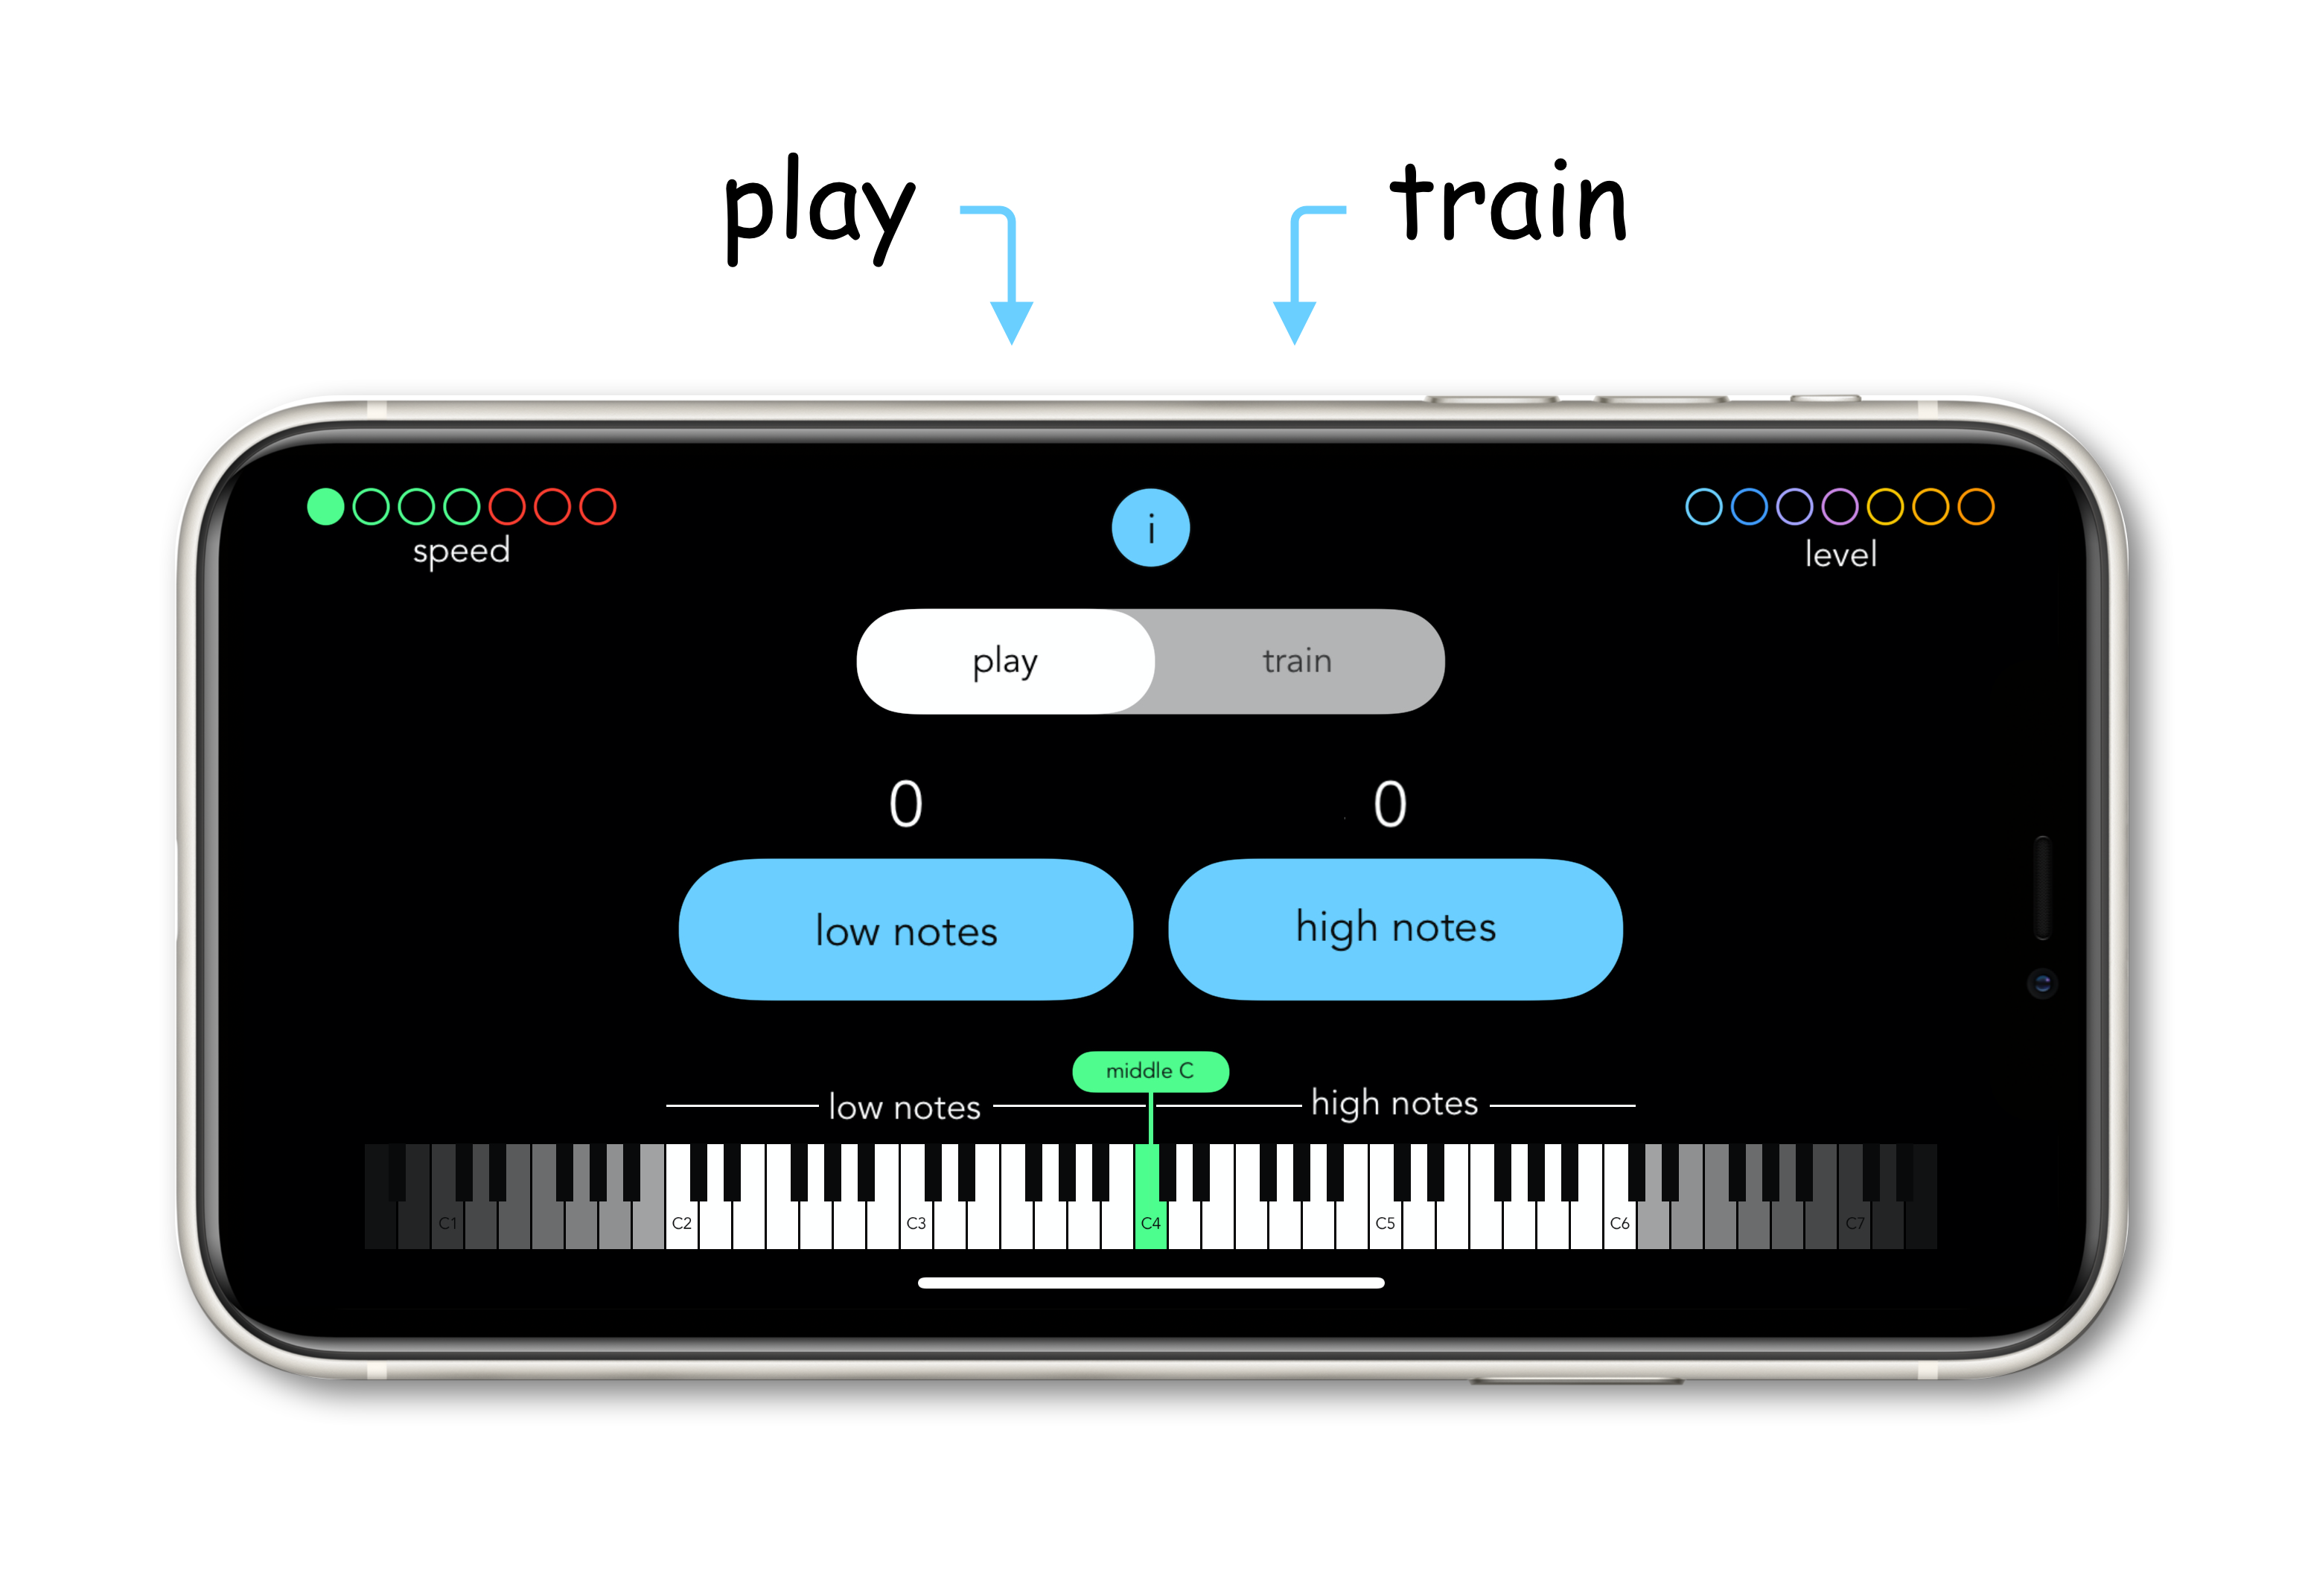 Play or train